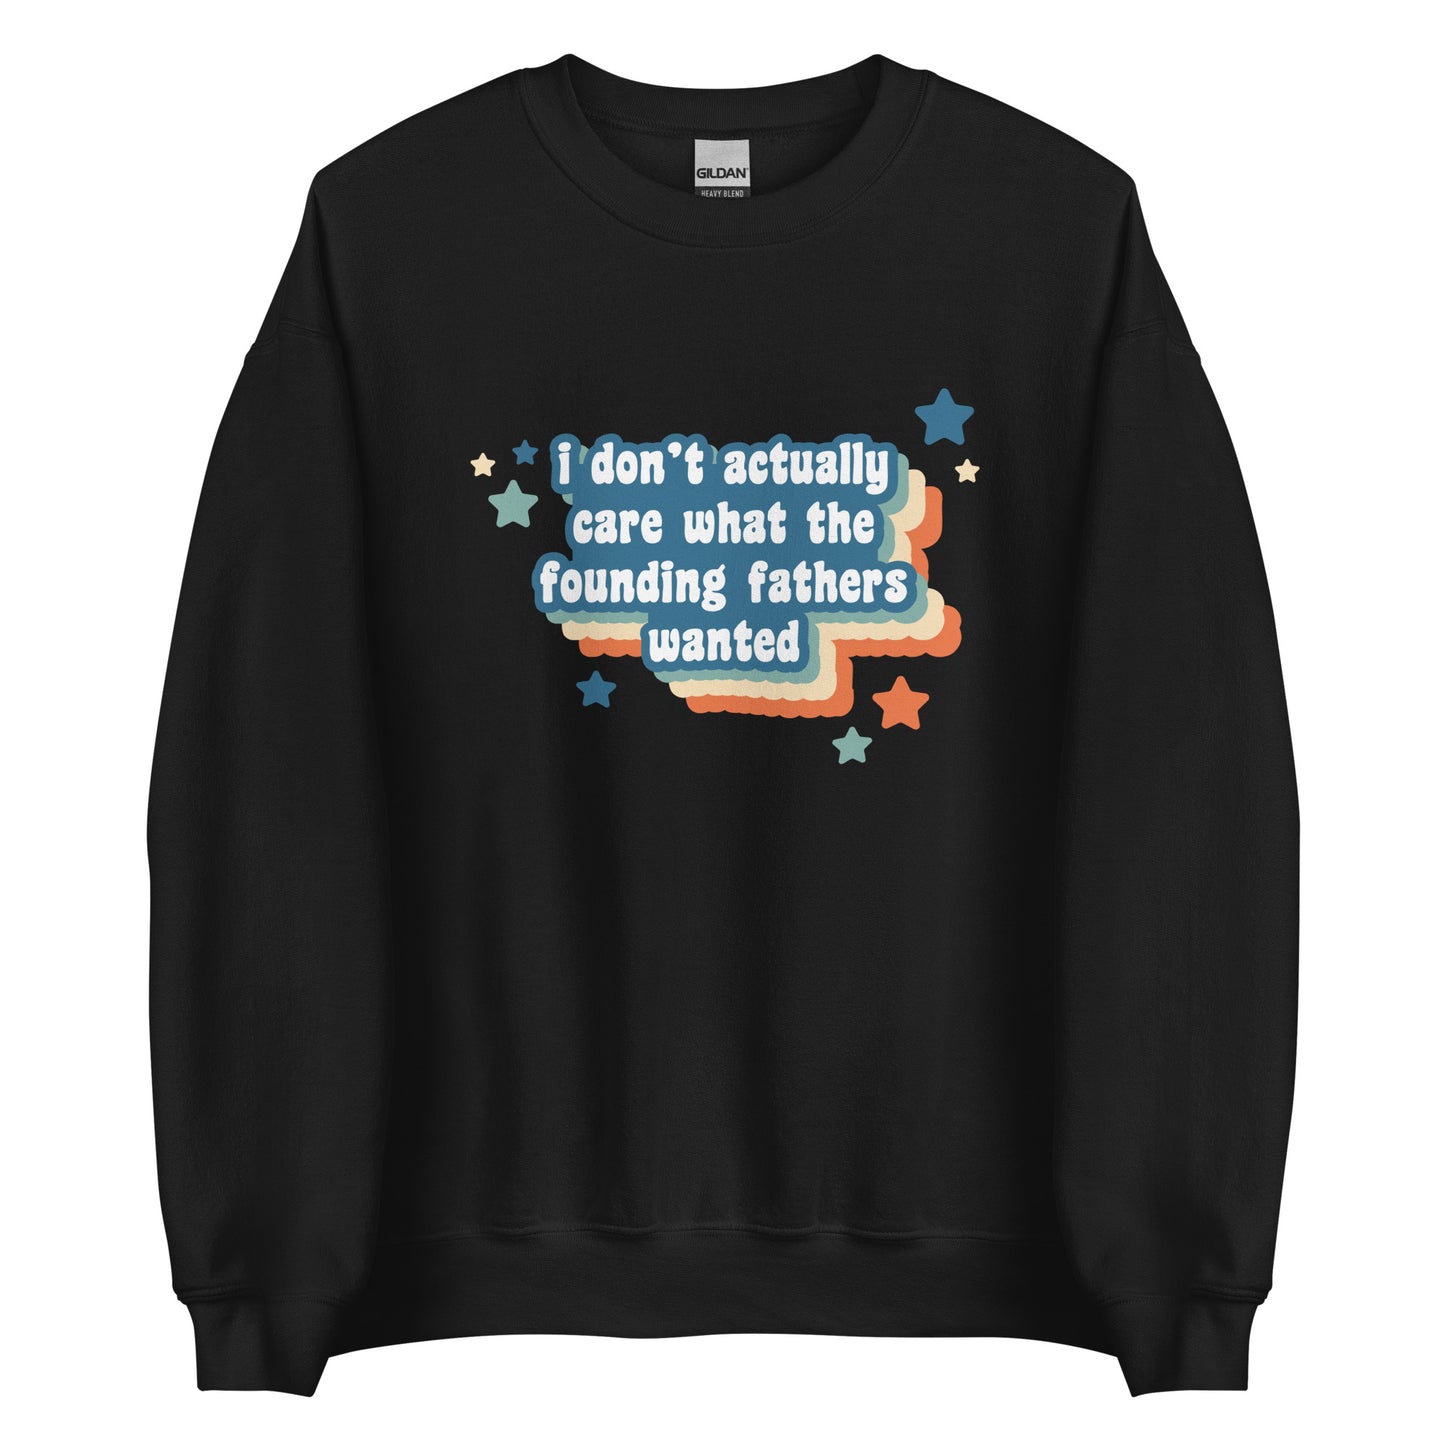 A black crewneck sweatshirt featuring text that reads "I Don't Actually Care What The Founding Fathers Wanted". Colorful stars and a drop shadow surround the text.